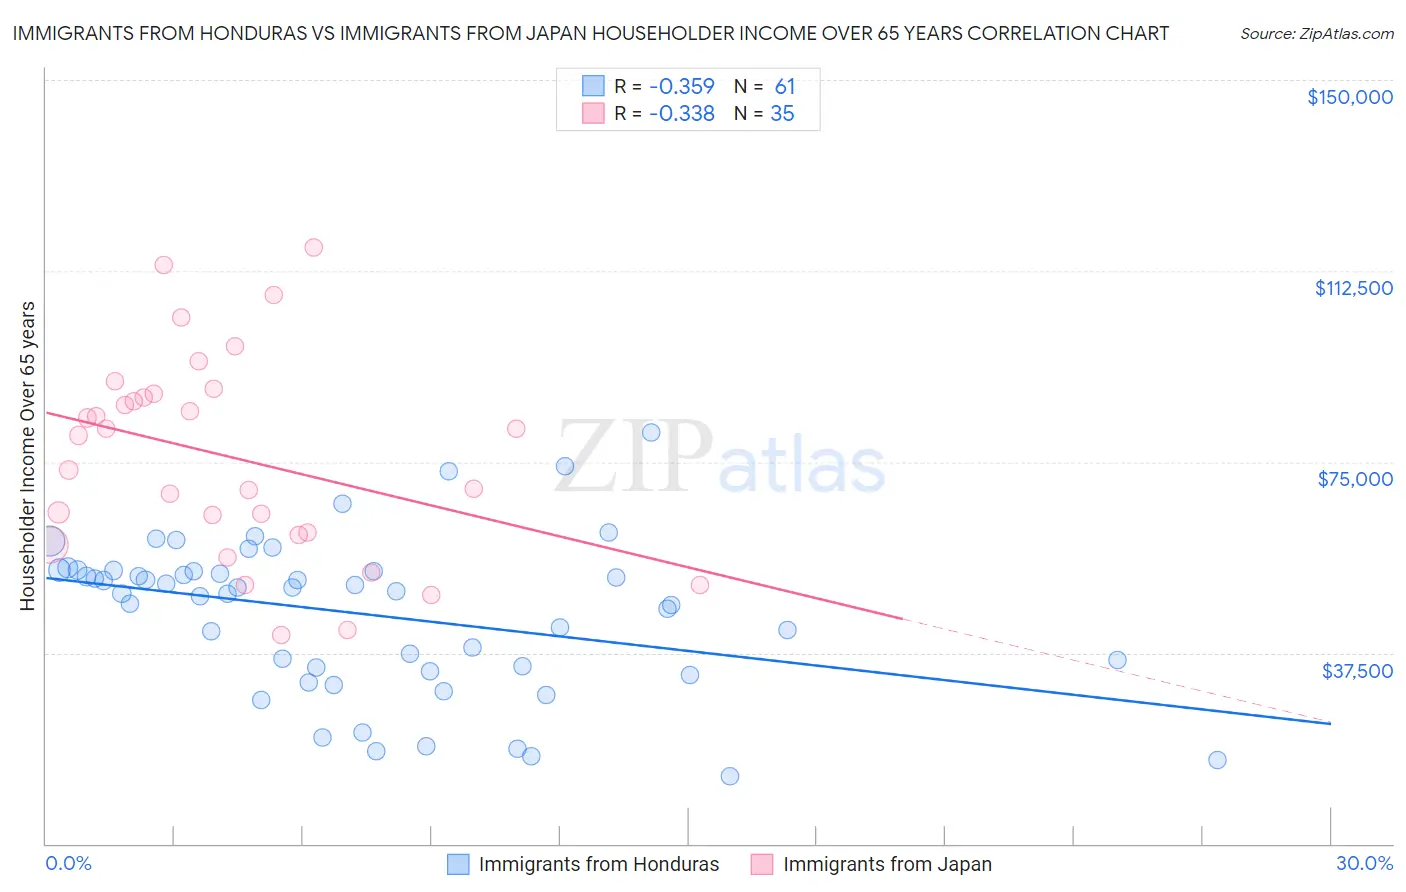 Immigrants from Honduras vs Immigrants from Japan Householder Income Over 65 years